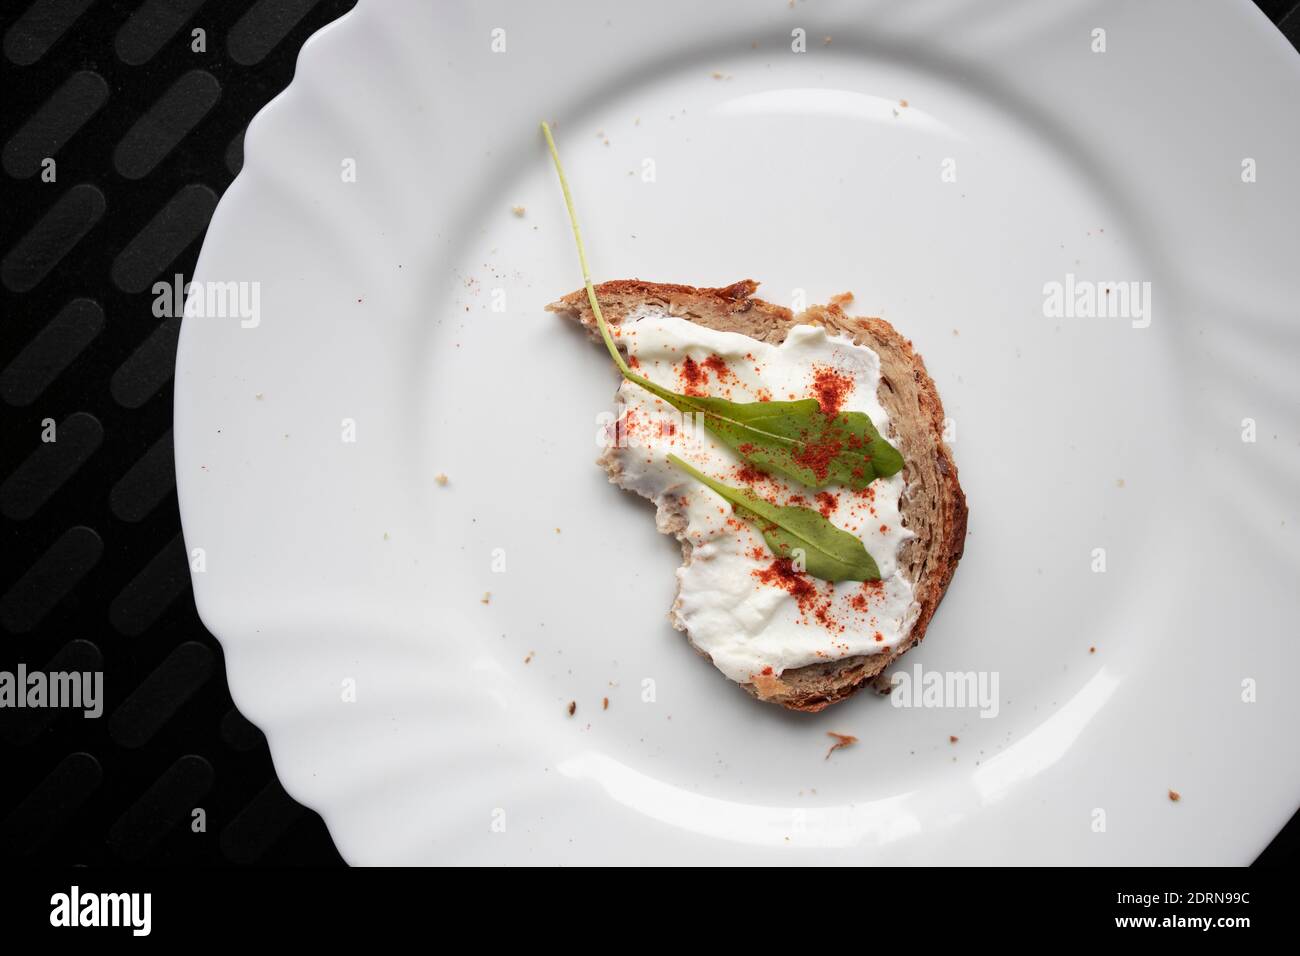 Healthy yeast free piece of bread with sour cream and arugula served Stock Photo